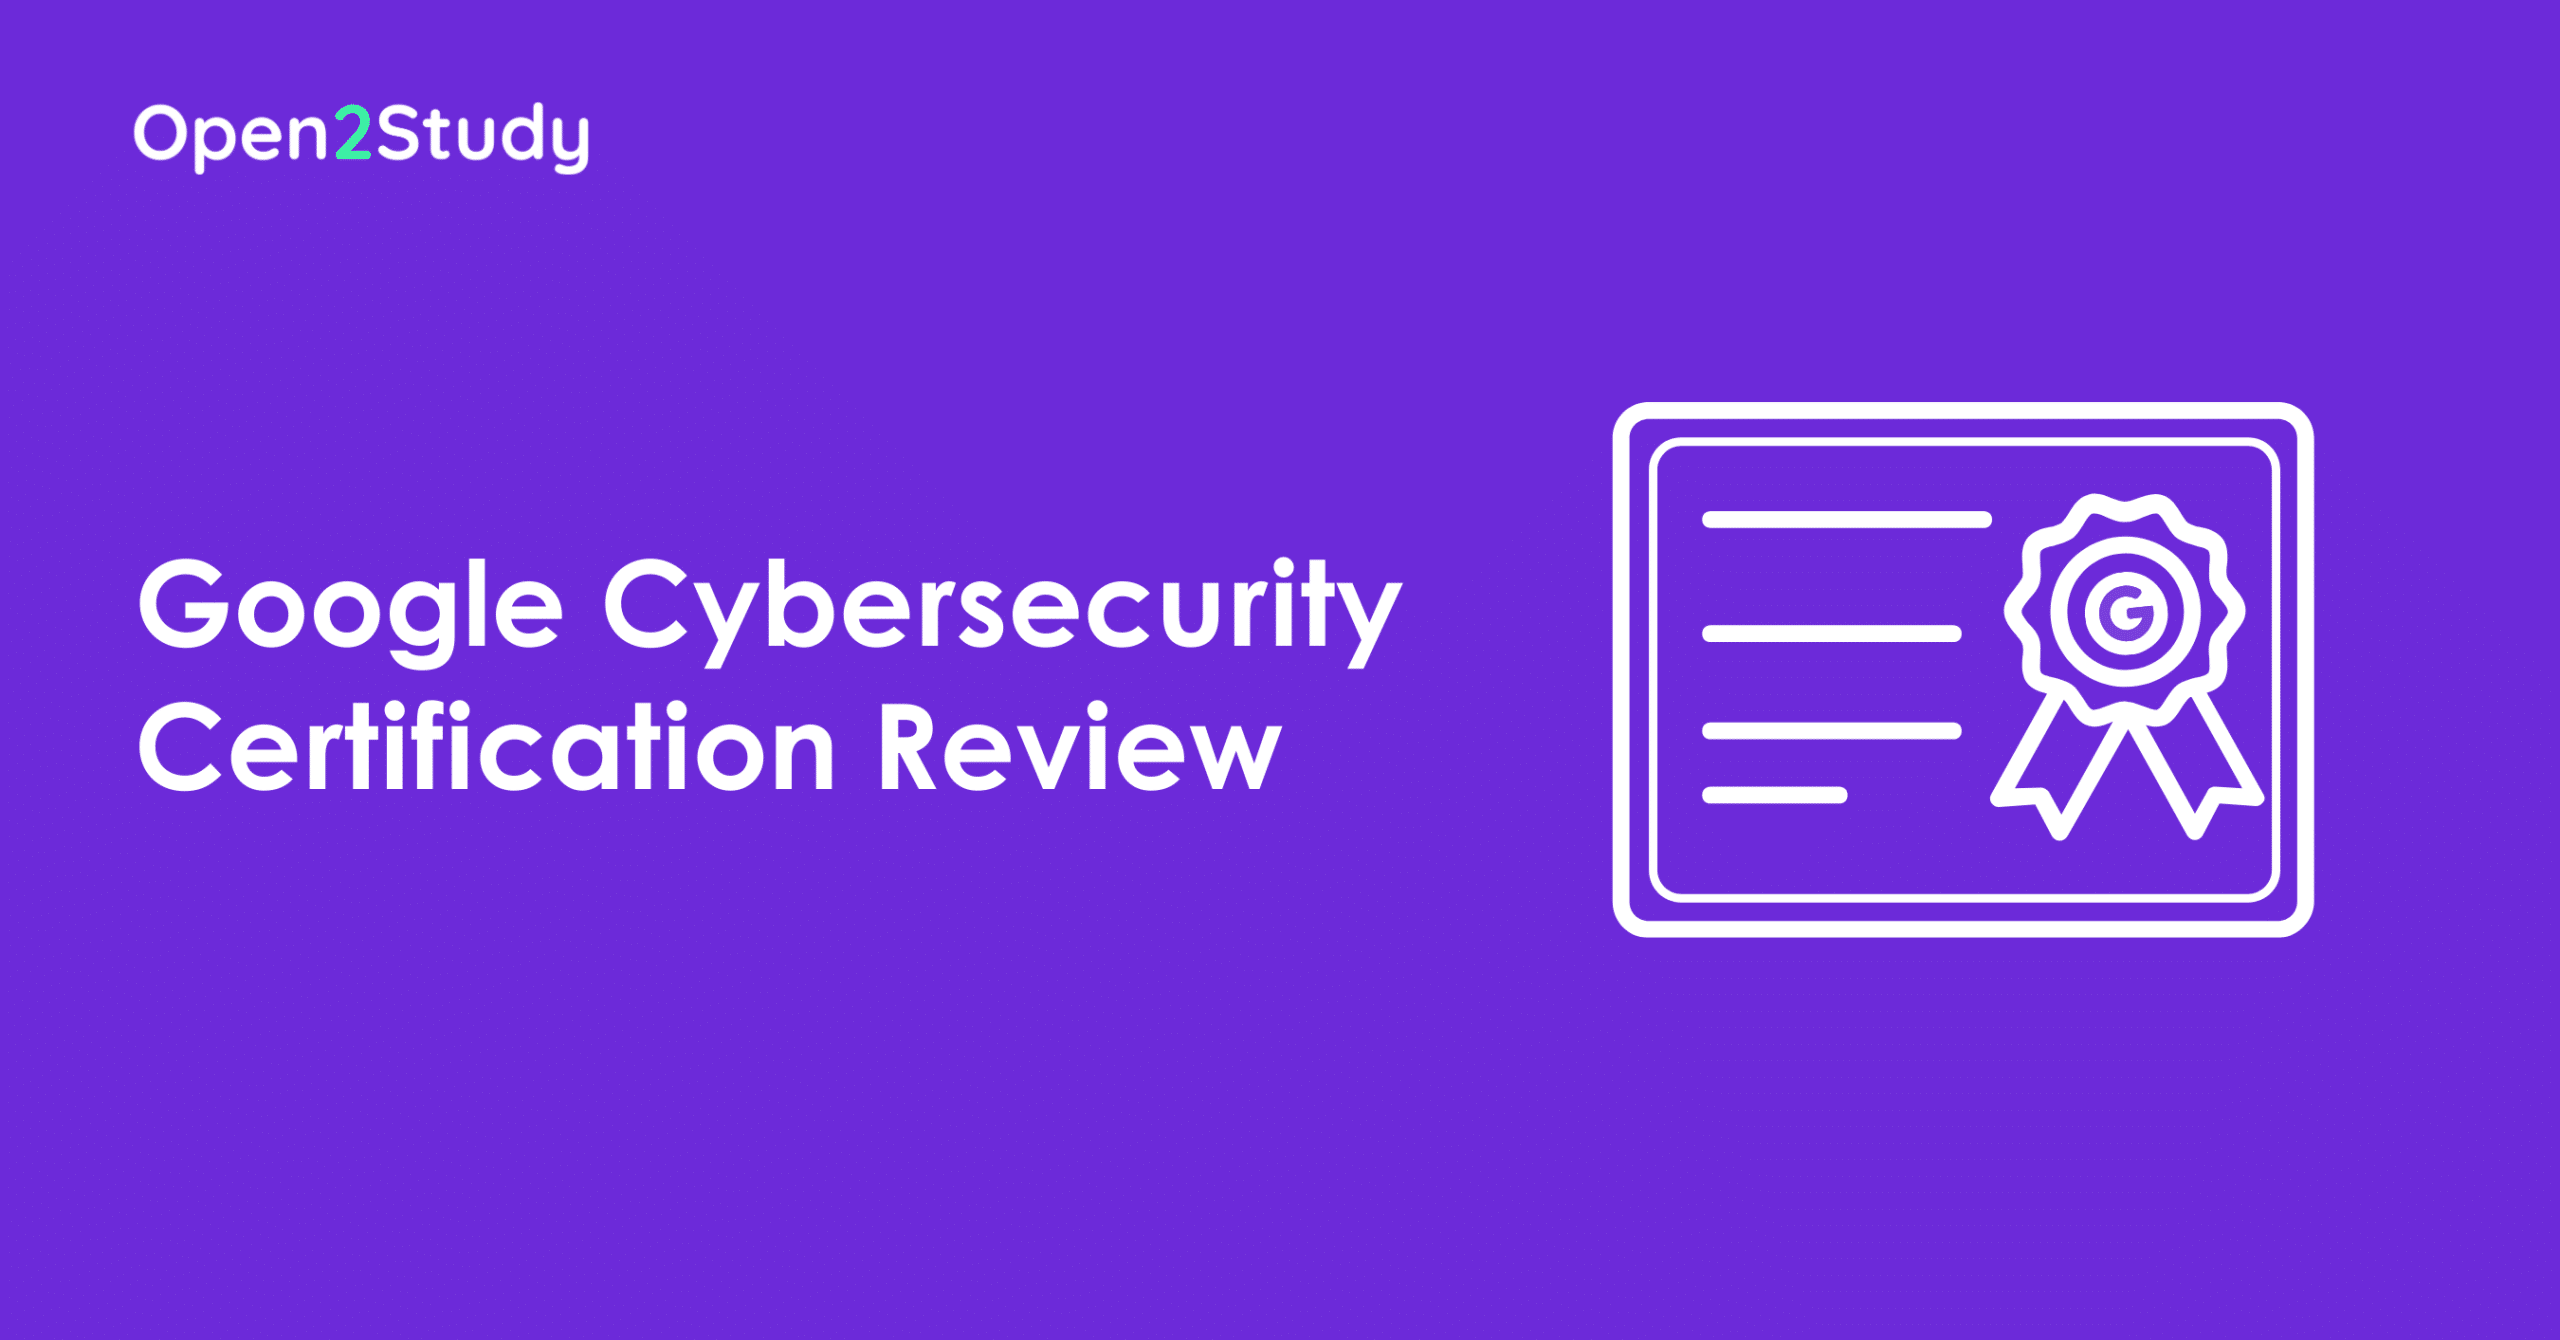 Google Cybersecurity Certification Review